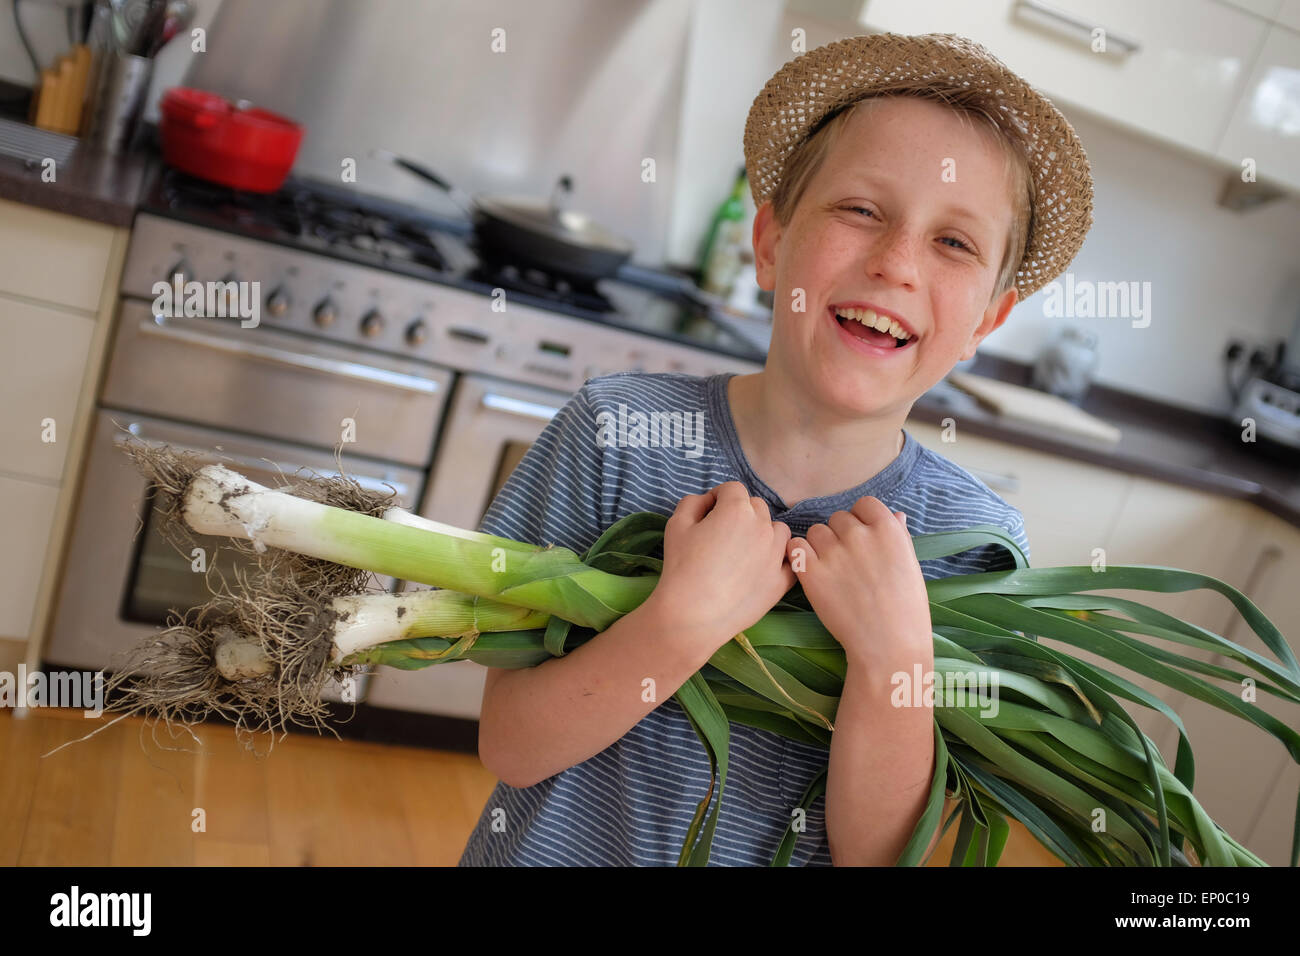 A happy boy with fresh grown organic leeks picked from the garden Stock Photo